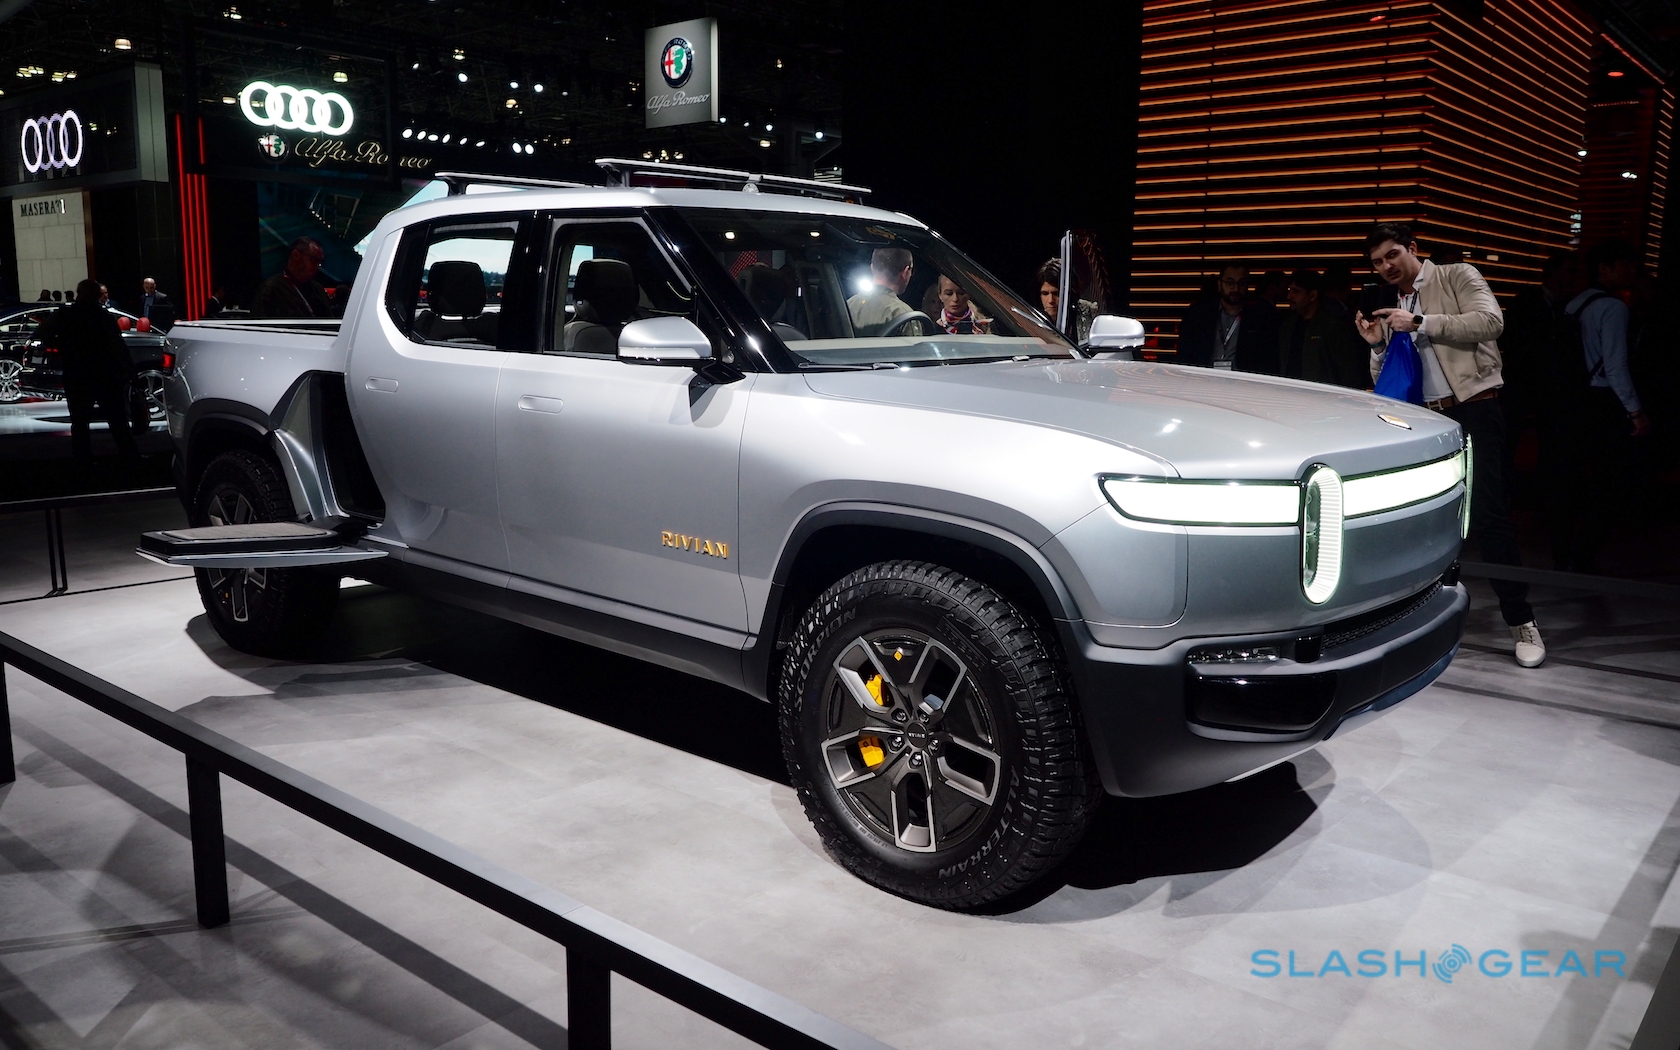 How a rumored Hummer EV reboot fits in GM's electric plans - SlashGear1680 x 1050